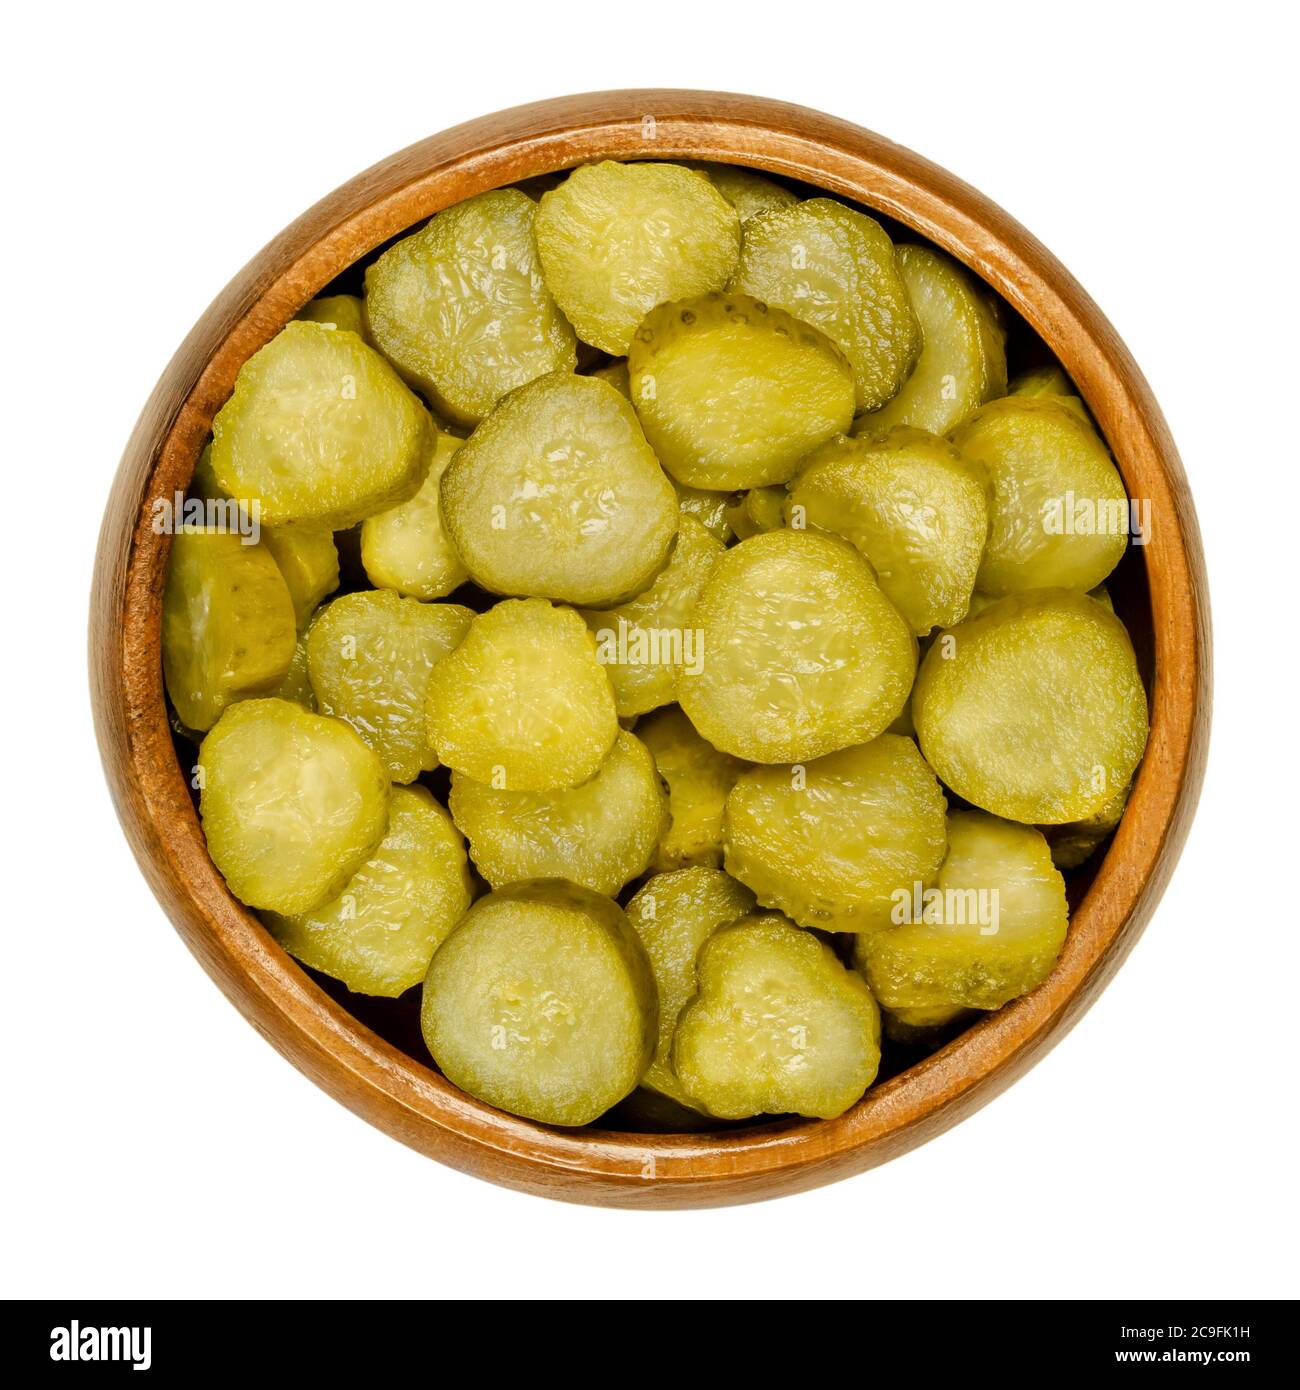 Pickled cucumber discs, also known as pickle or gherkin, in wooden bowl. Small pickled cucumbers with bumpy skin, sliced. Baby pickles. Close-up. Stock Photo